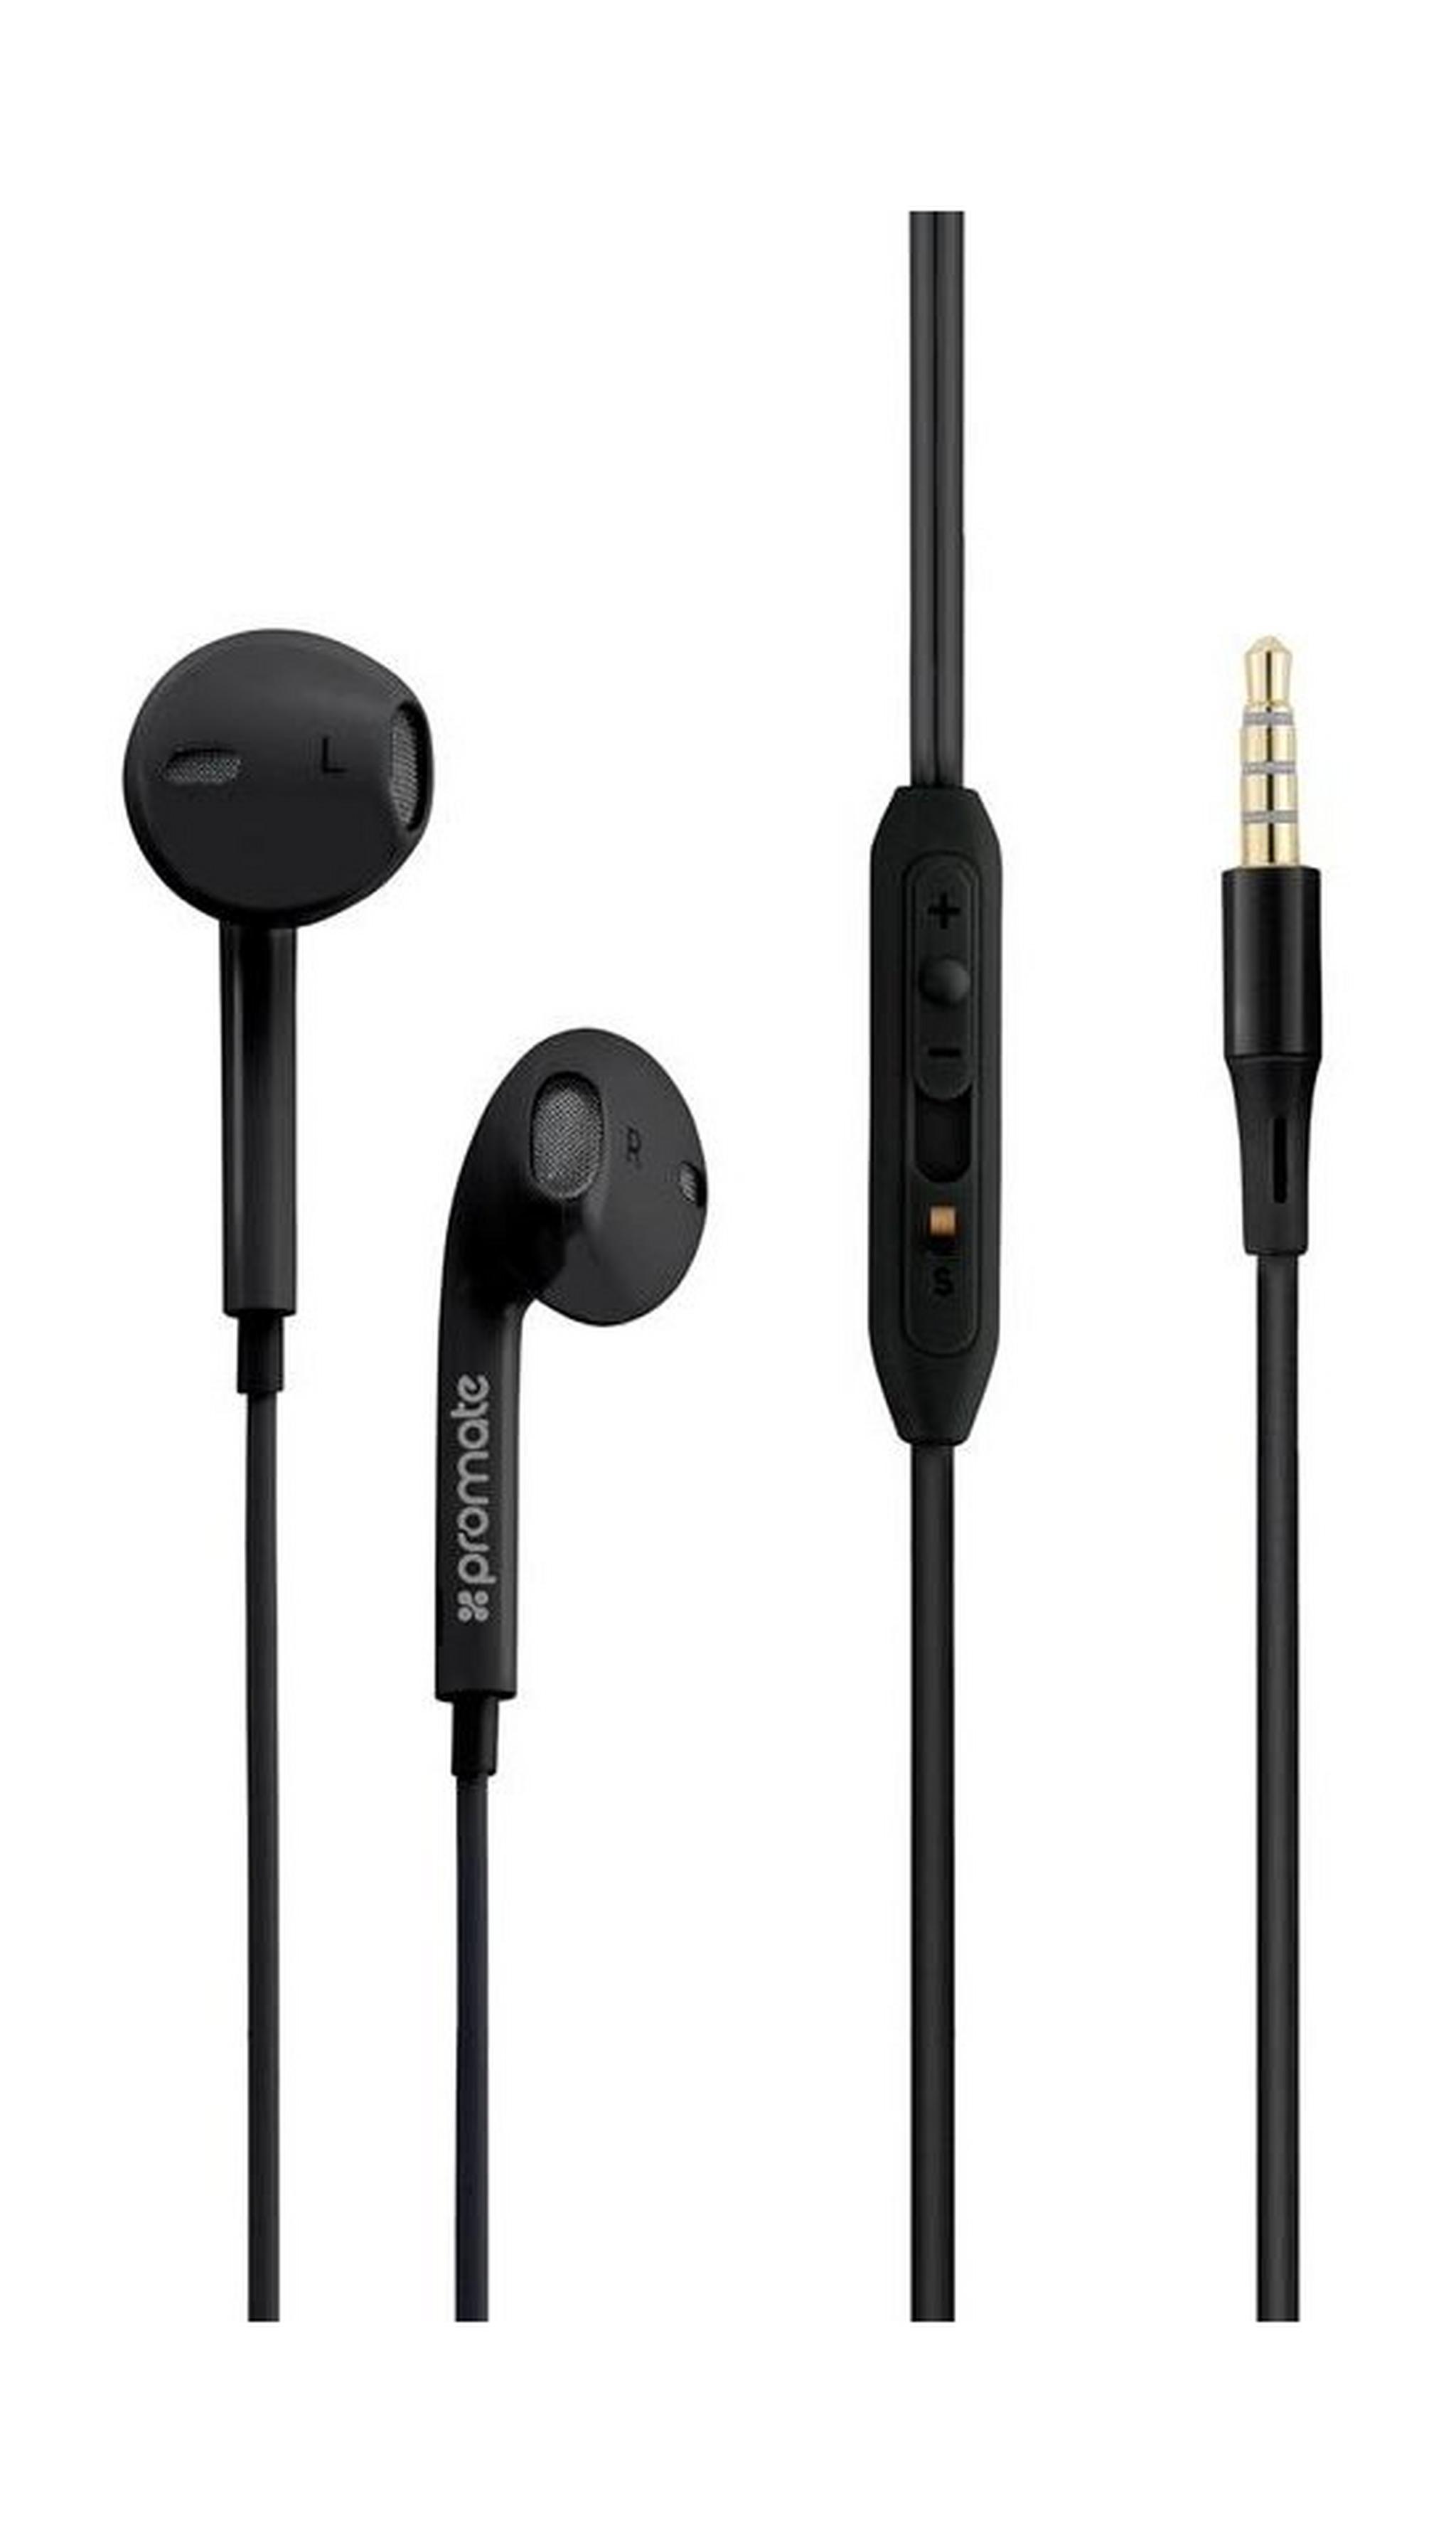 Promate GearPod-IS2 Lightweight High-Performance Stereo Earbuds - Black